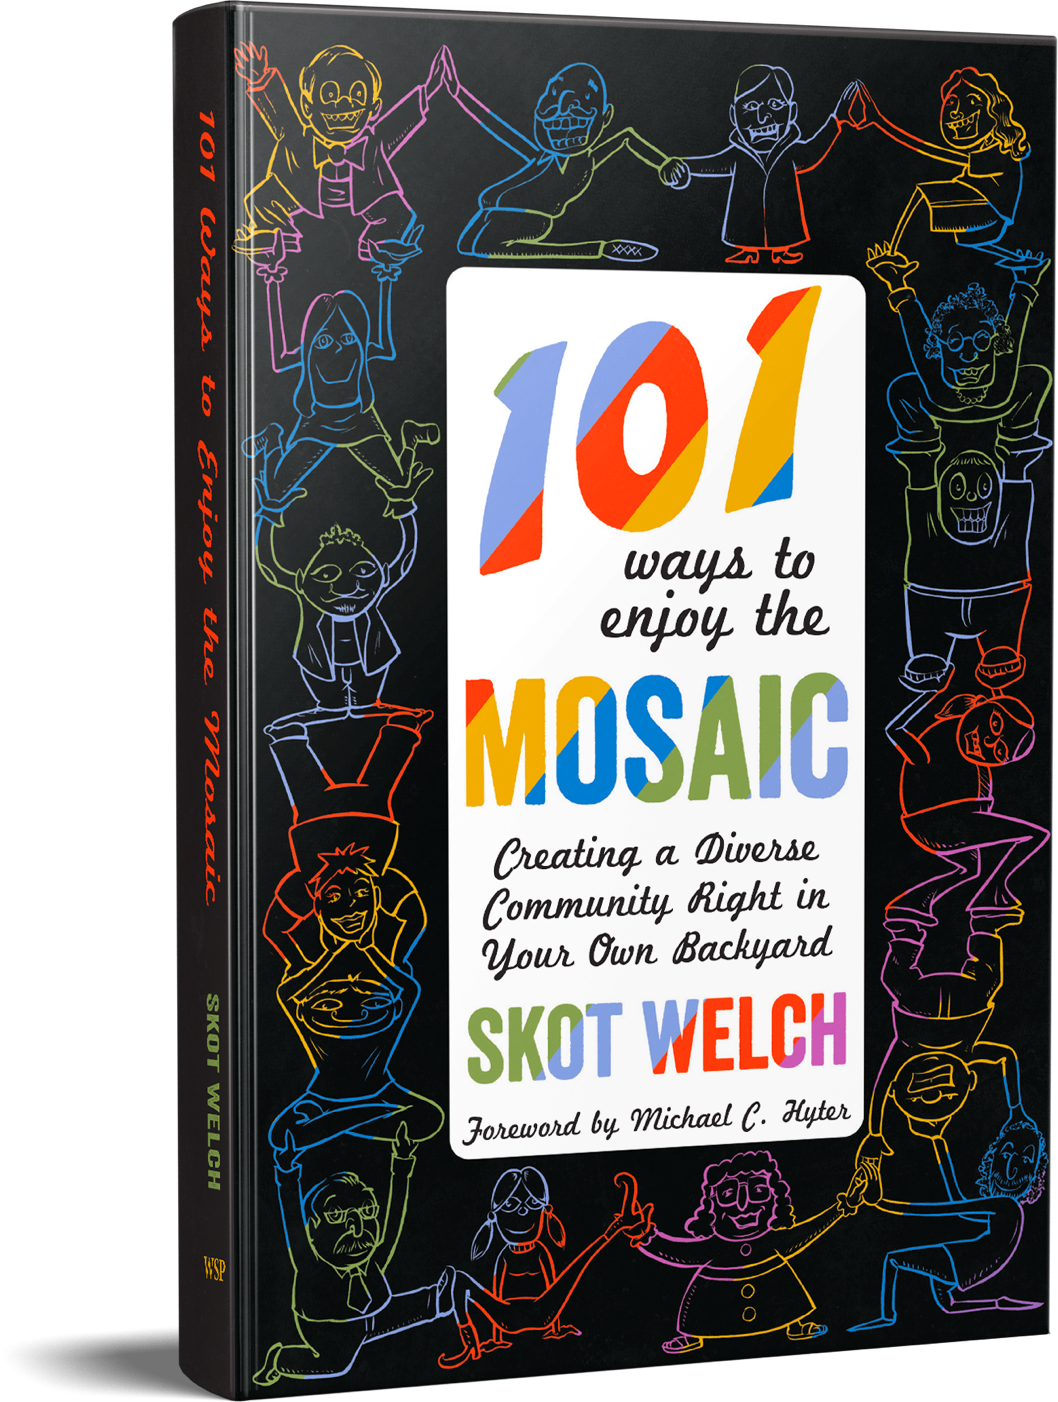 101 Ways to Enjoy the Mosaic Book Cover